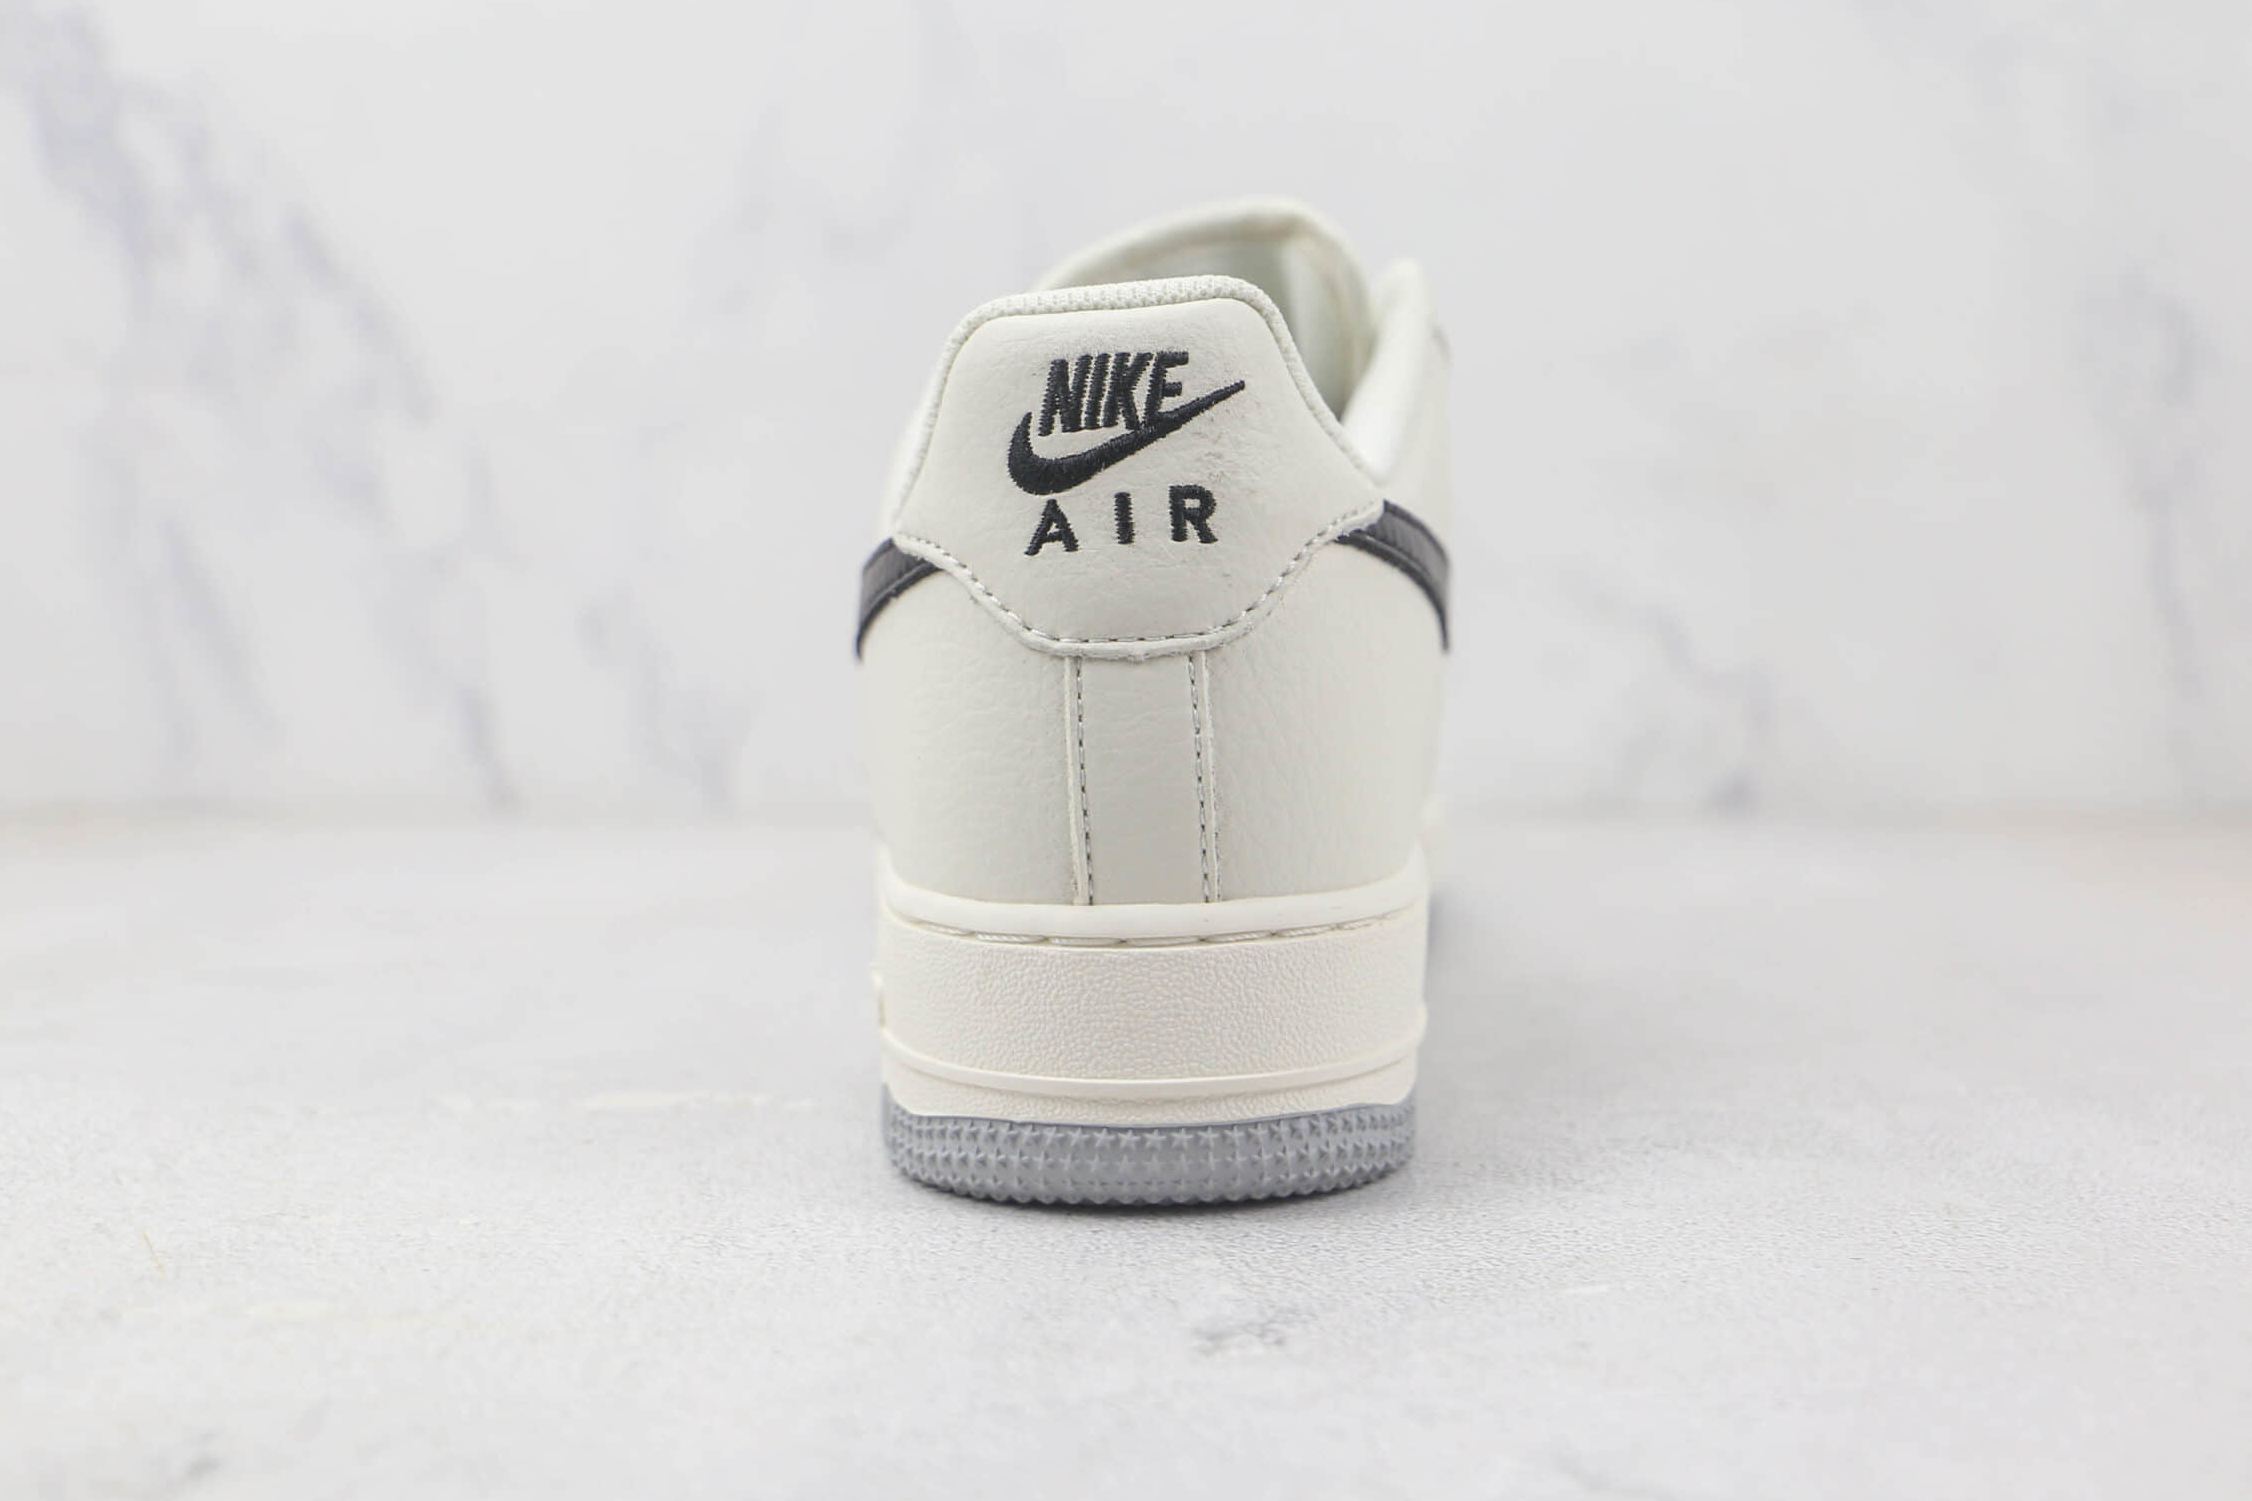 Nike Air Force 1 07 Low Light Grey Black White Shoes TQ9685-785 - Stylish and Versatile Footwear for Men.